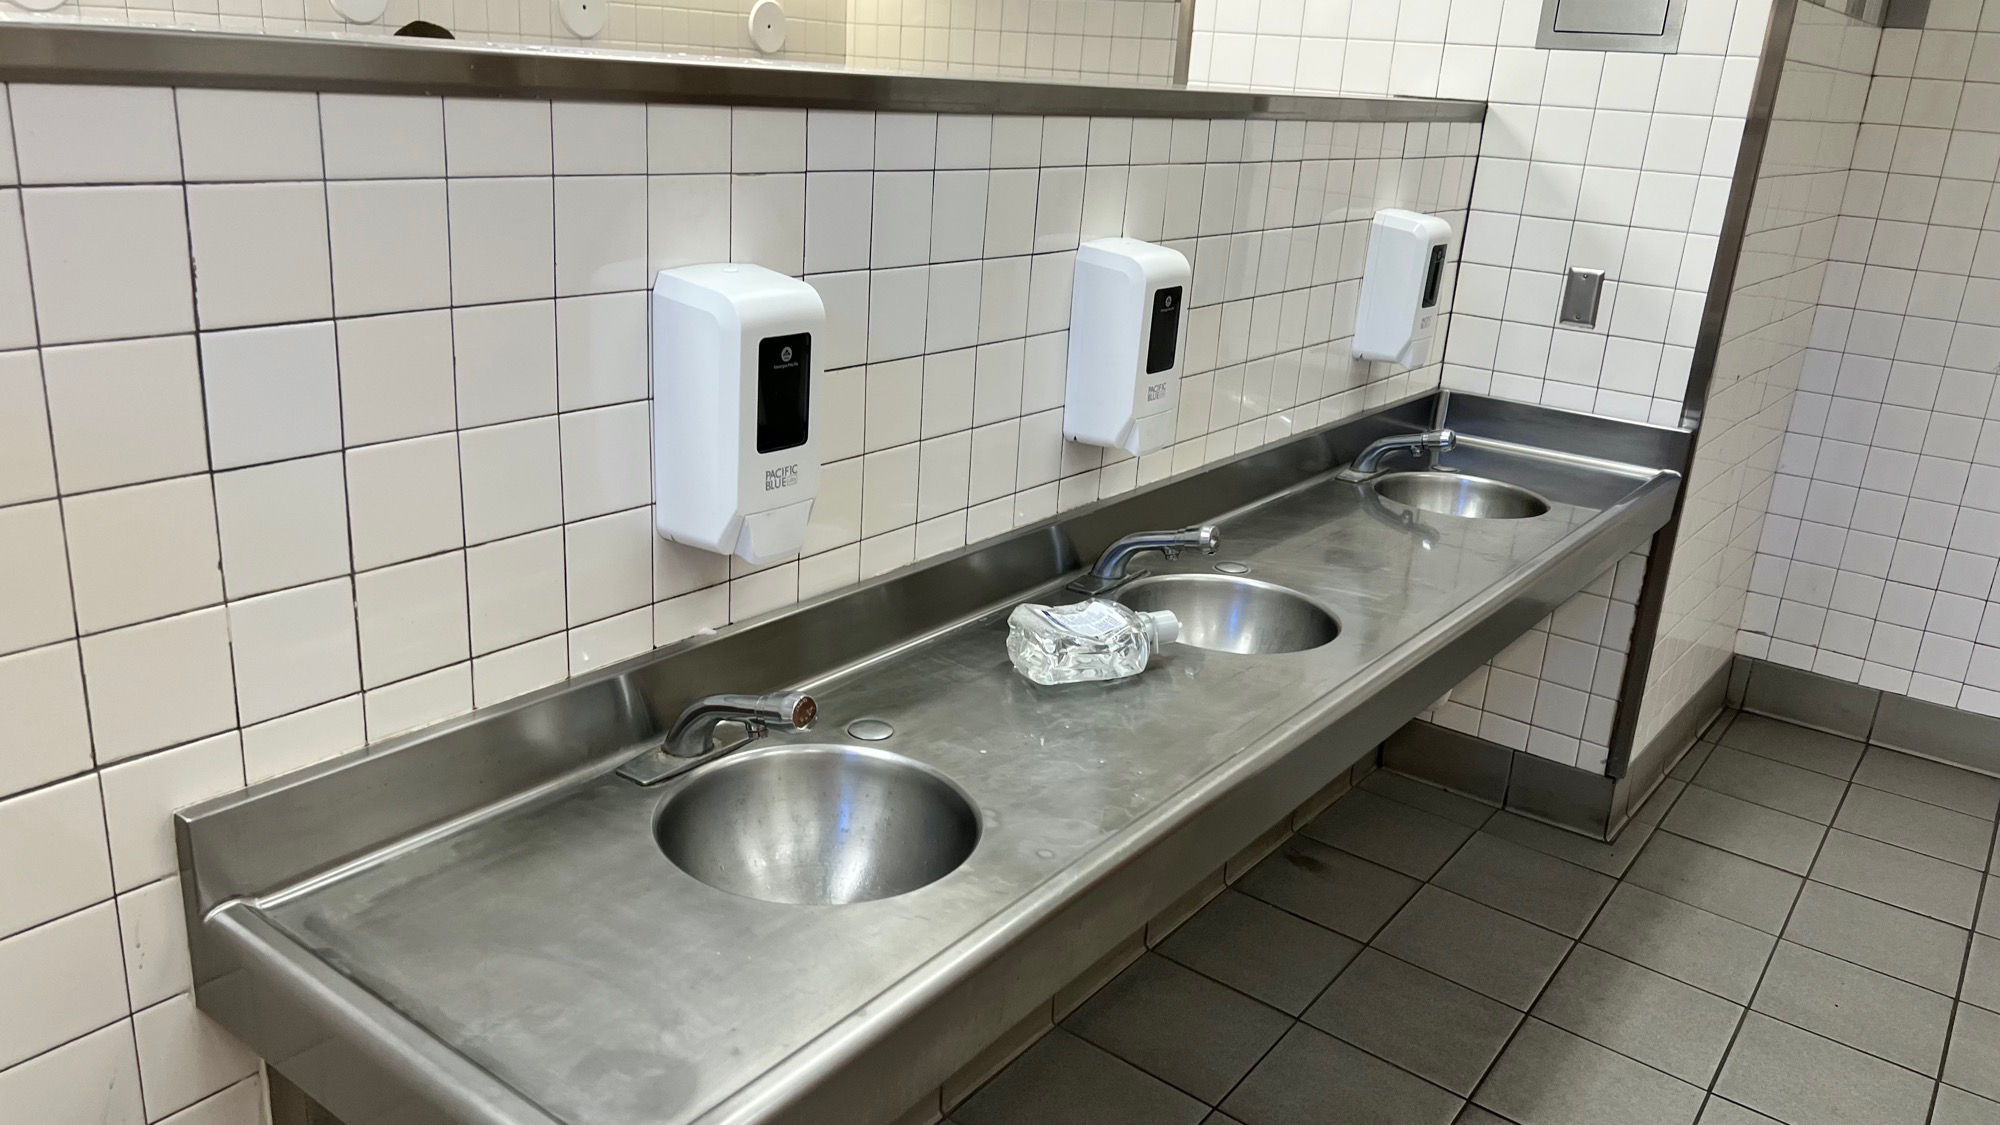 Timber Mountain Restroom Sinks